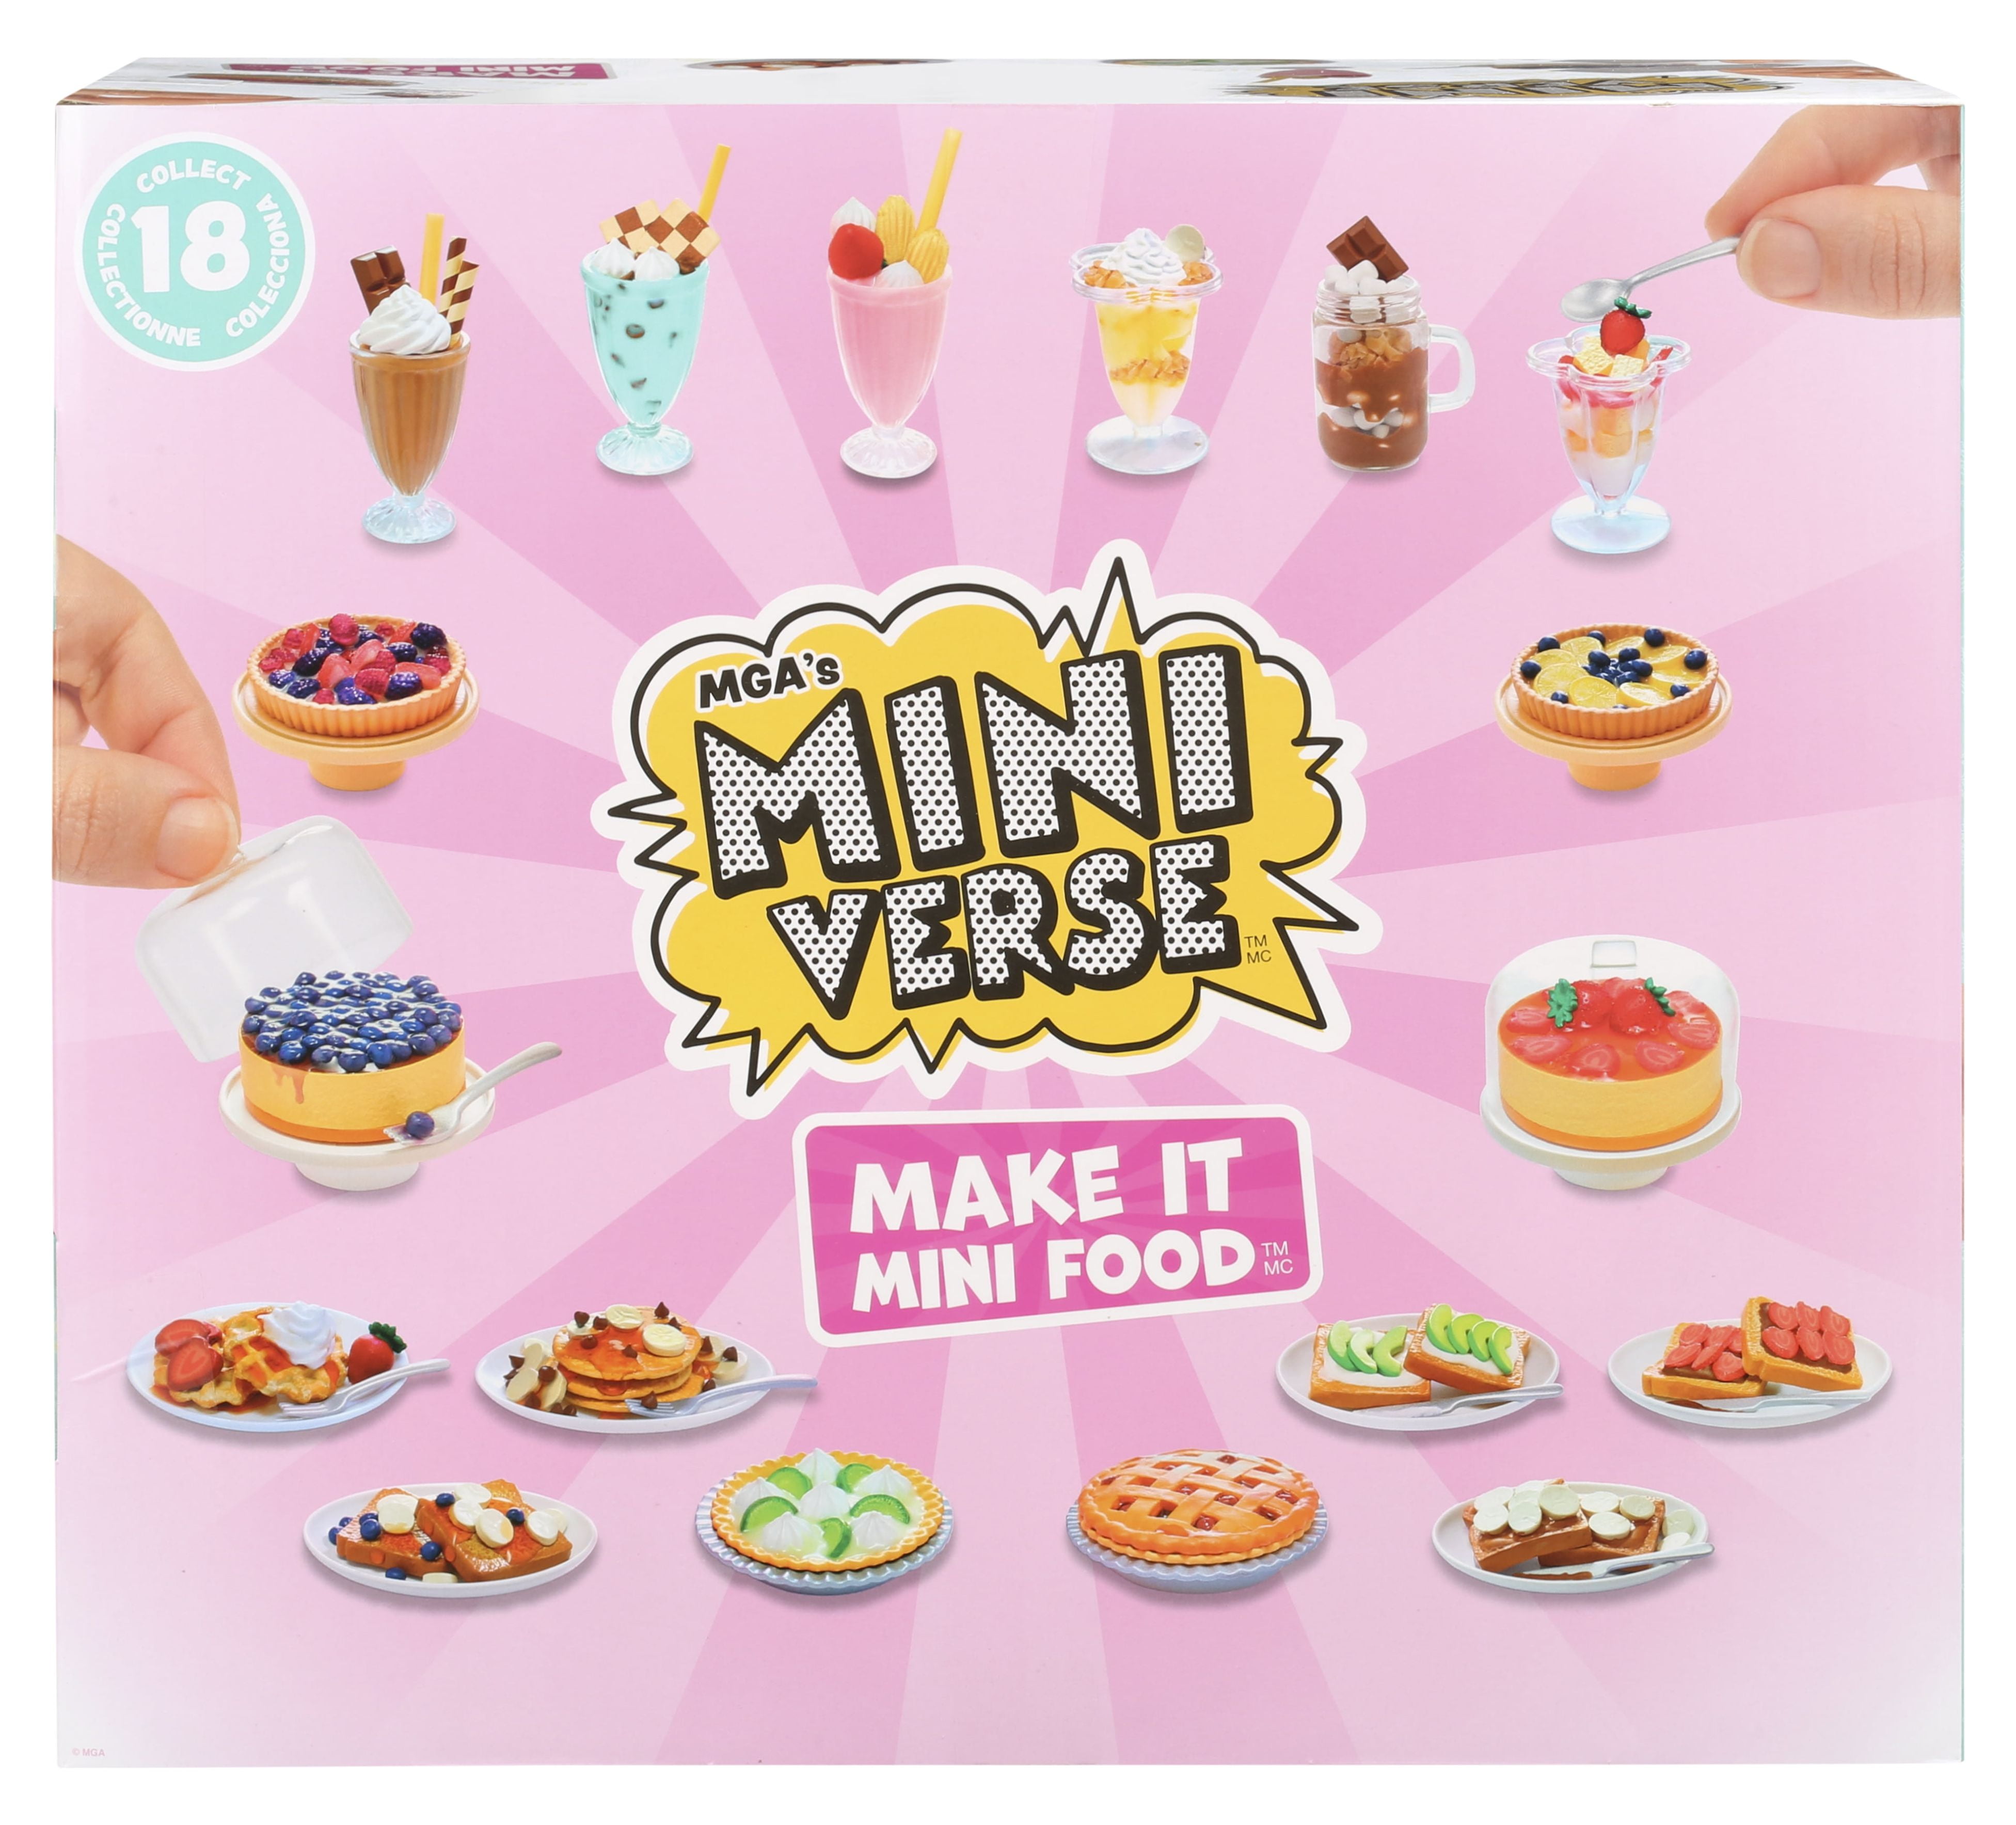 Miniverse Make It Mini Food DINER HOLIDAY Mystery Pack [NOT EDIBLE!]